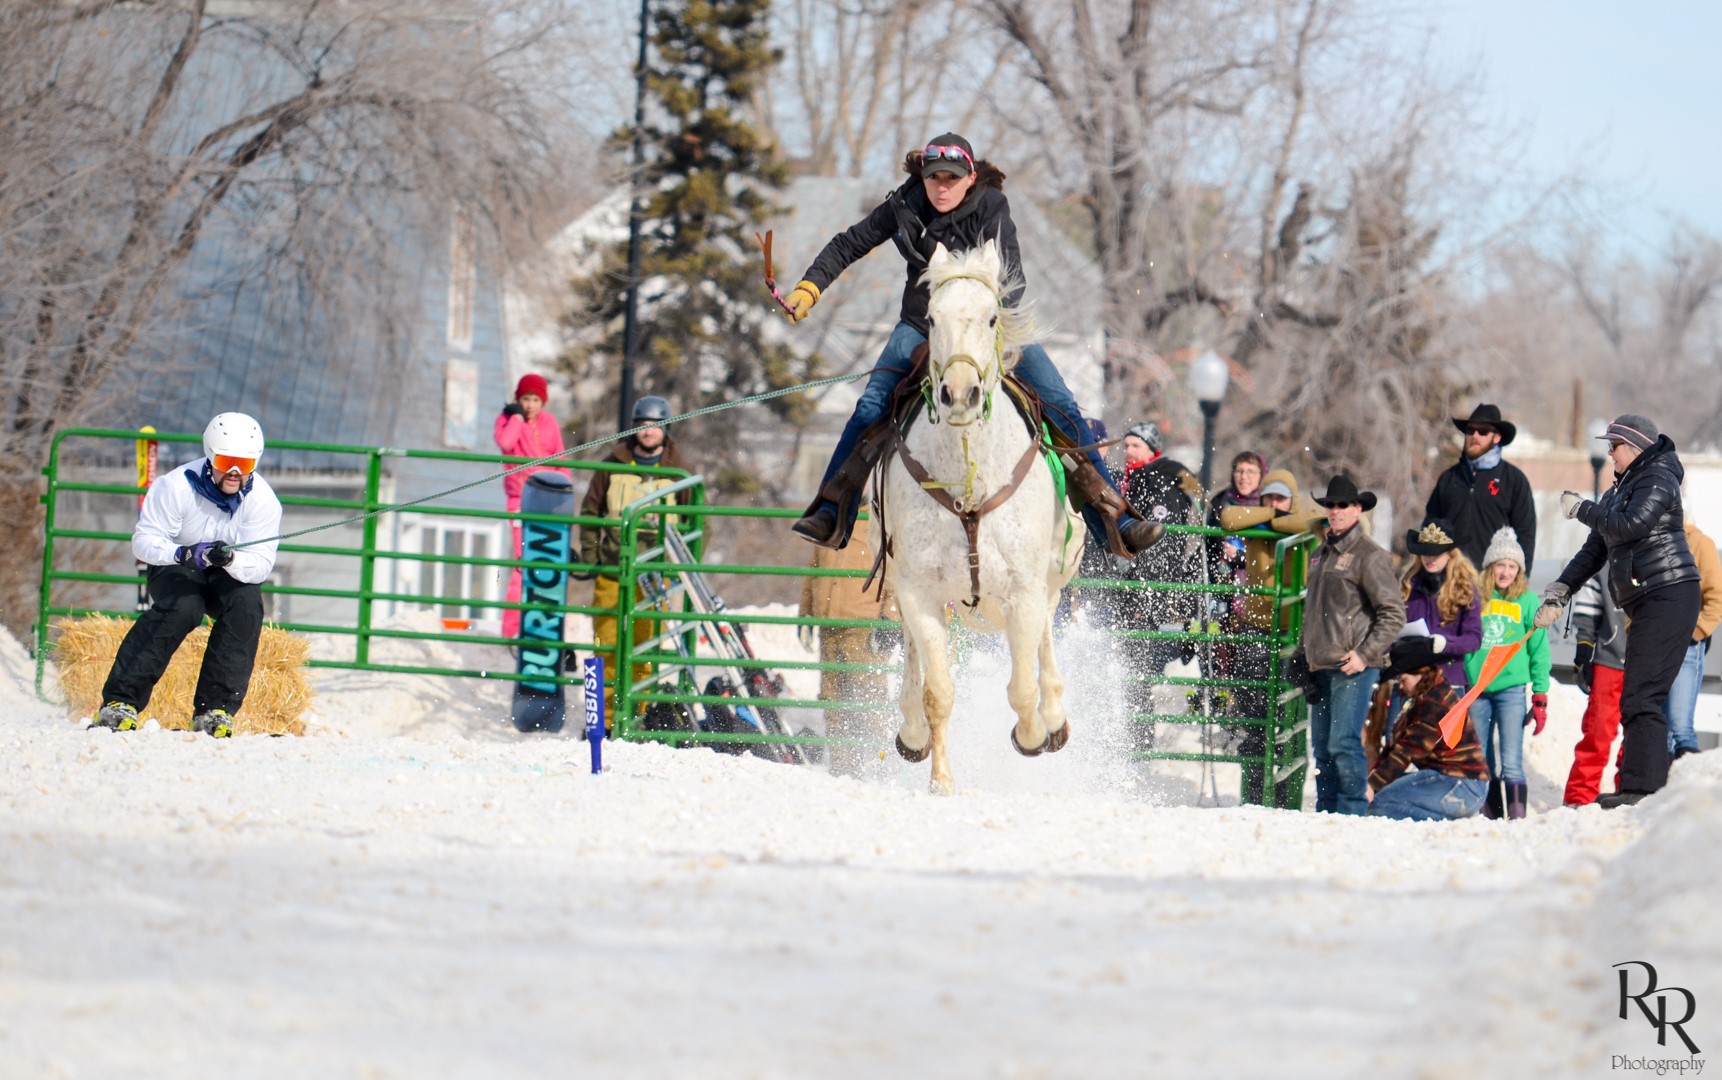 Council to Receive Update on WYO Winter Rodeo Sheridan Media